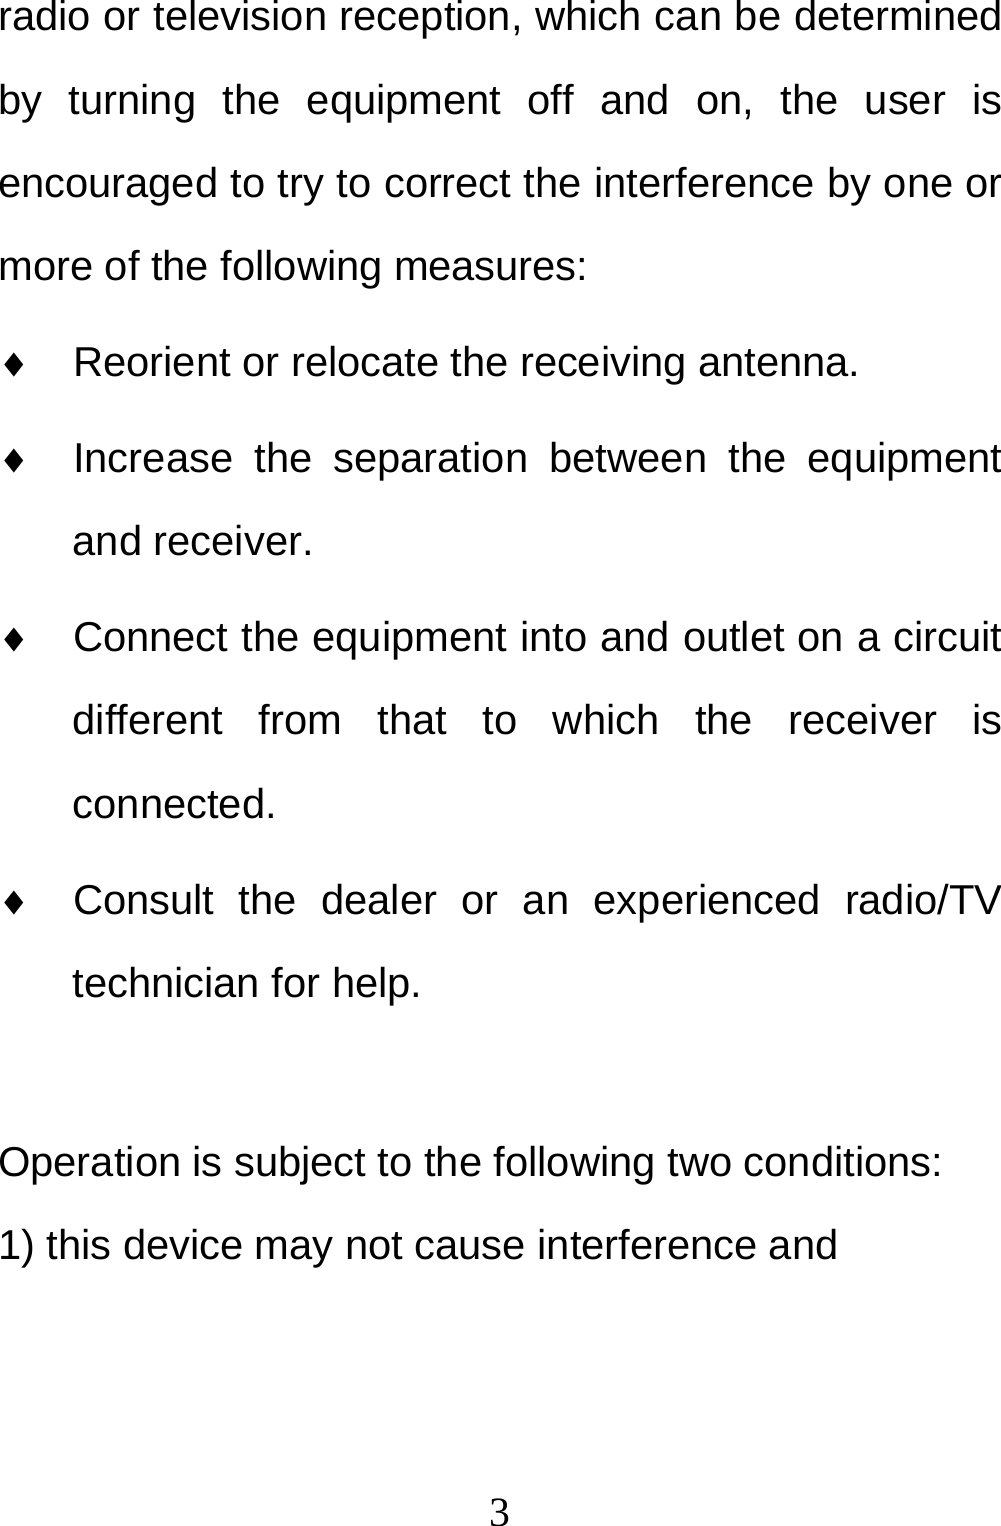  3radio or television reception, which can be determined by turning the equipment off and on, the user is encouraged to try to correct the interference by one or more of the following measures:   Reorient or relocate the receiving antenna.   Increase the separation between the equipment and receiver.   Connect the equipment into and outlet on a circuit different from that to which the receiver is connected.   Consult the dealer or an experienced radio/TV technician for help.  Operation is subject to the following two conditions: 1) this device may not cause interference and 